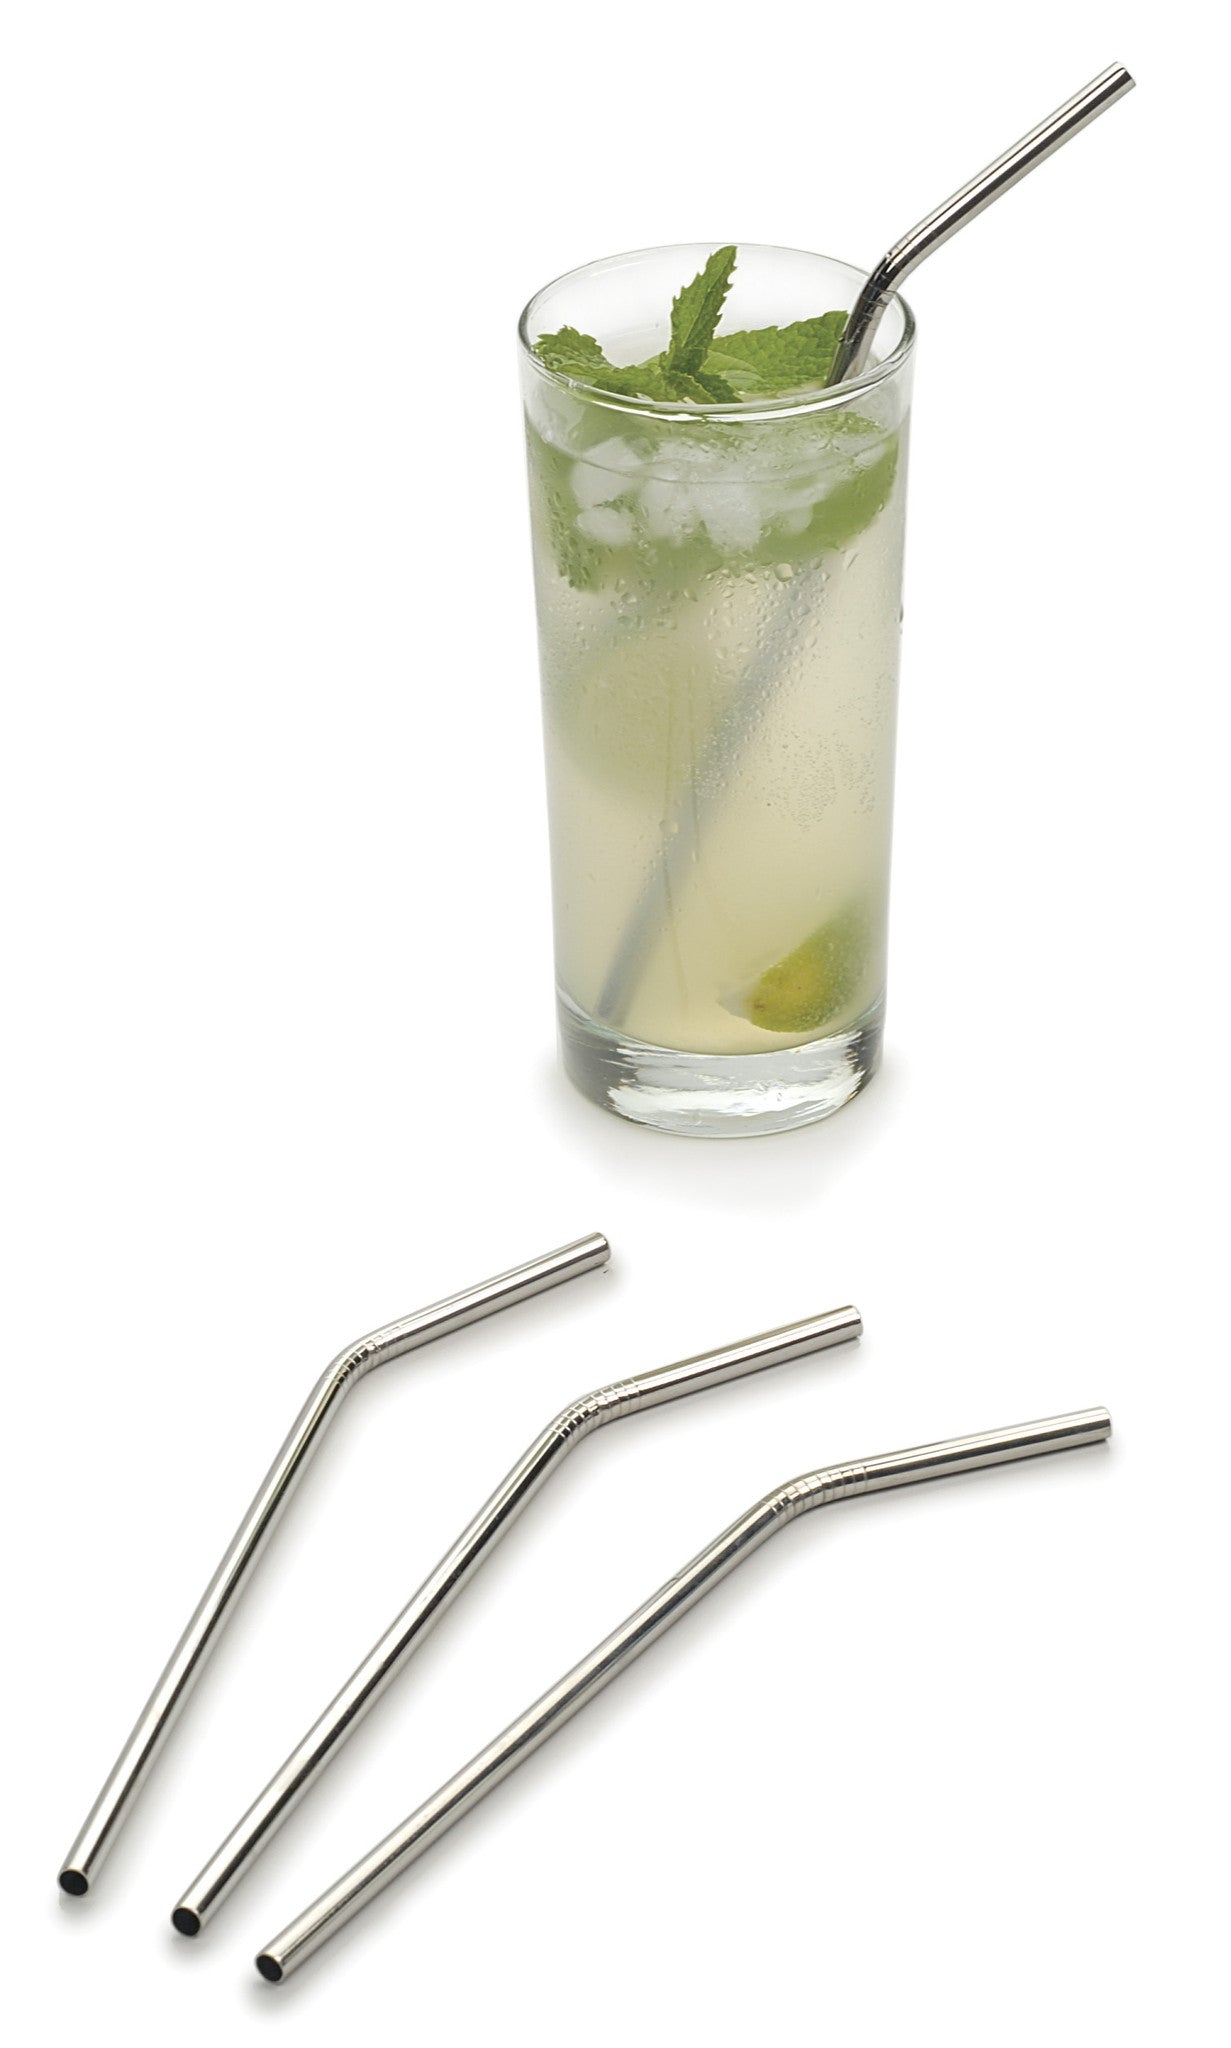 Angled Stainless Steel Straw